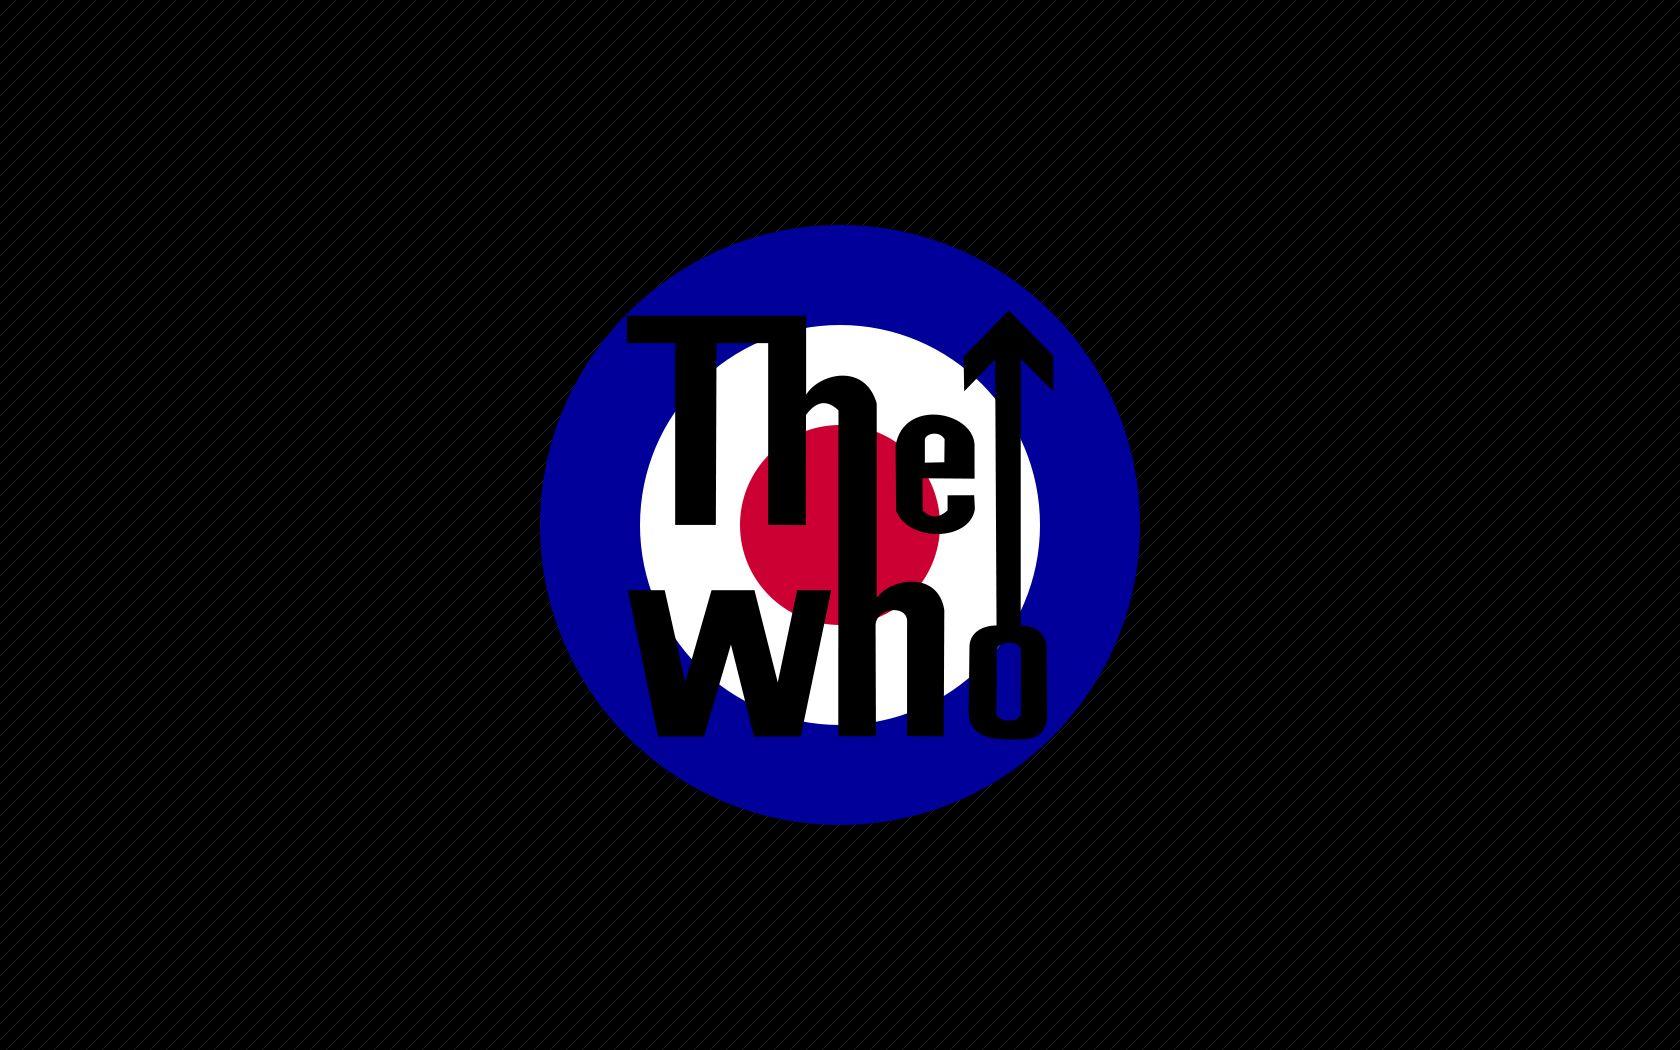 The Who Wallpaper